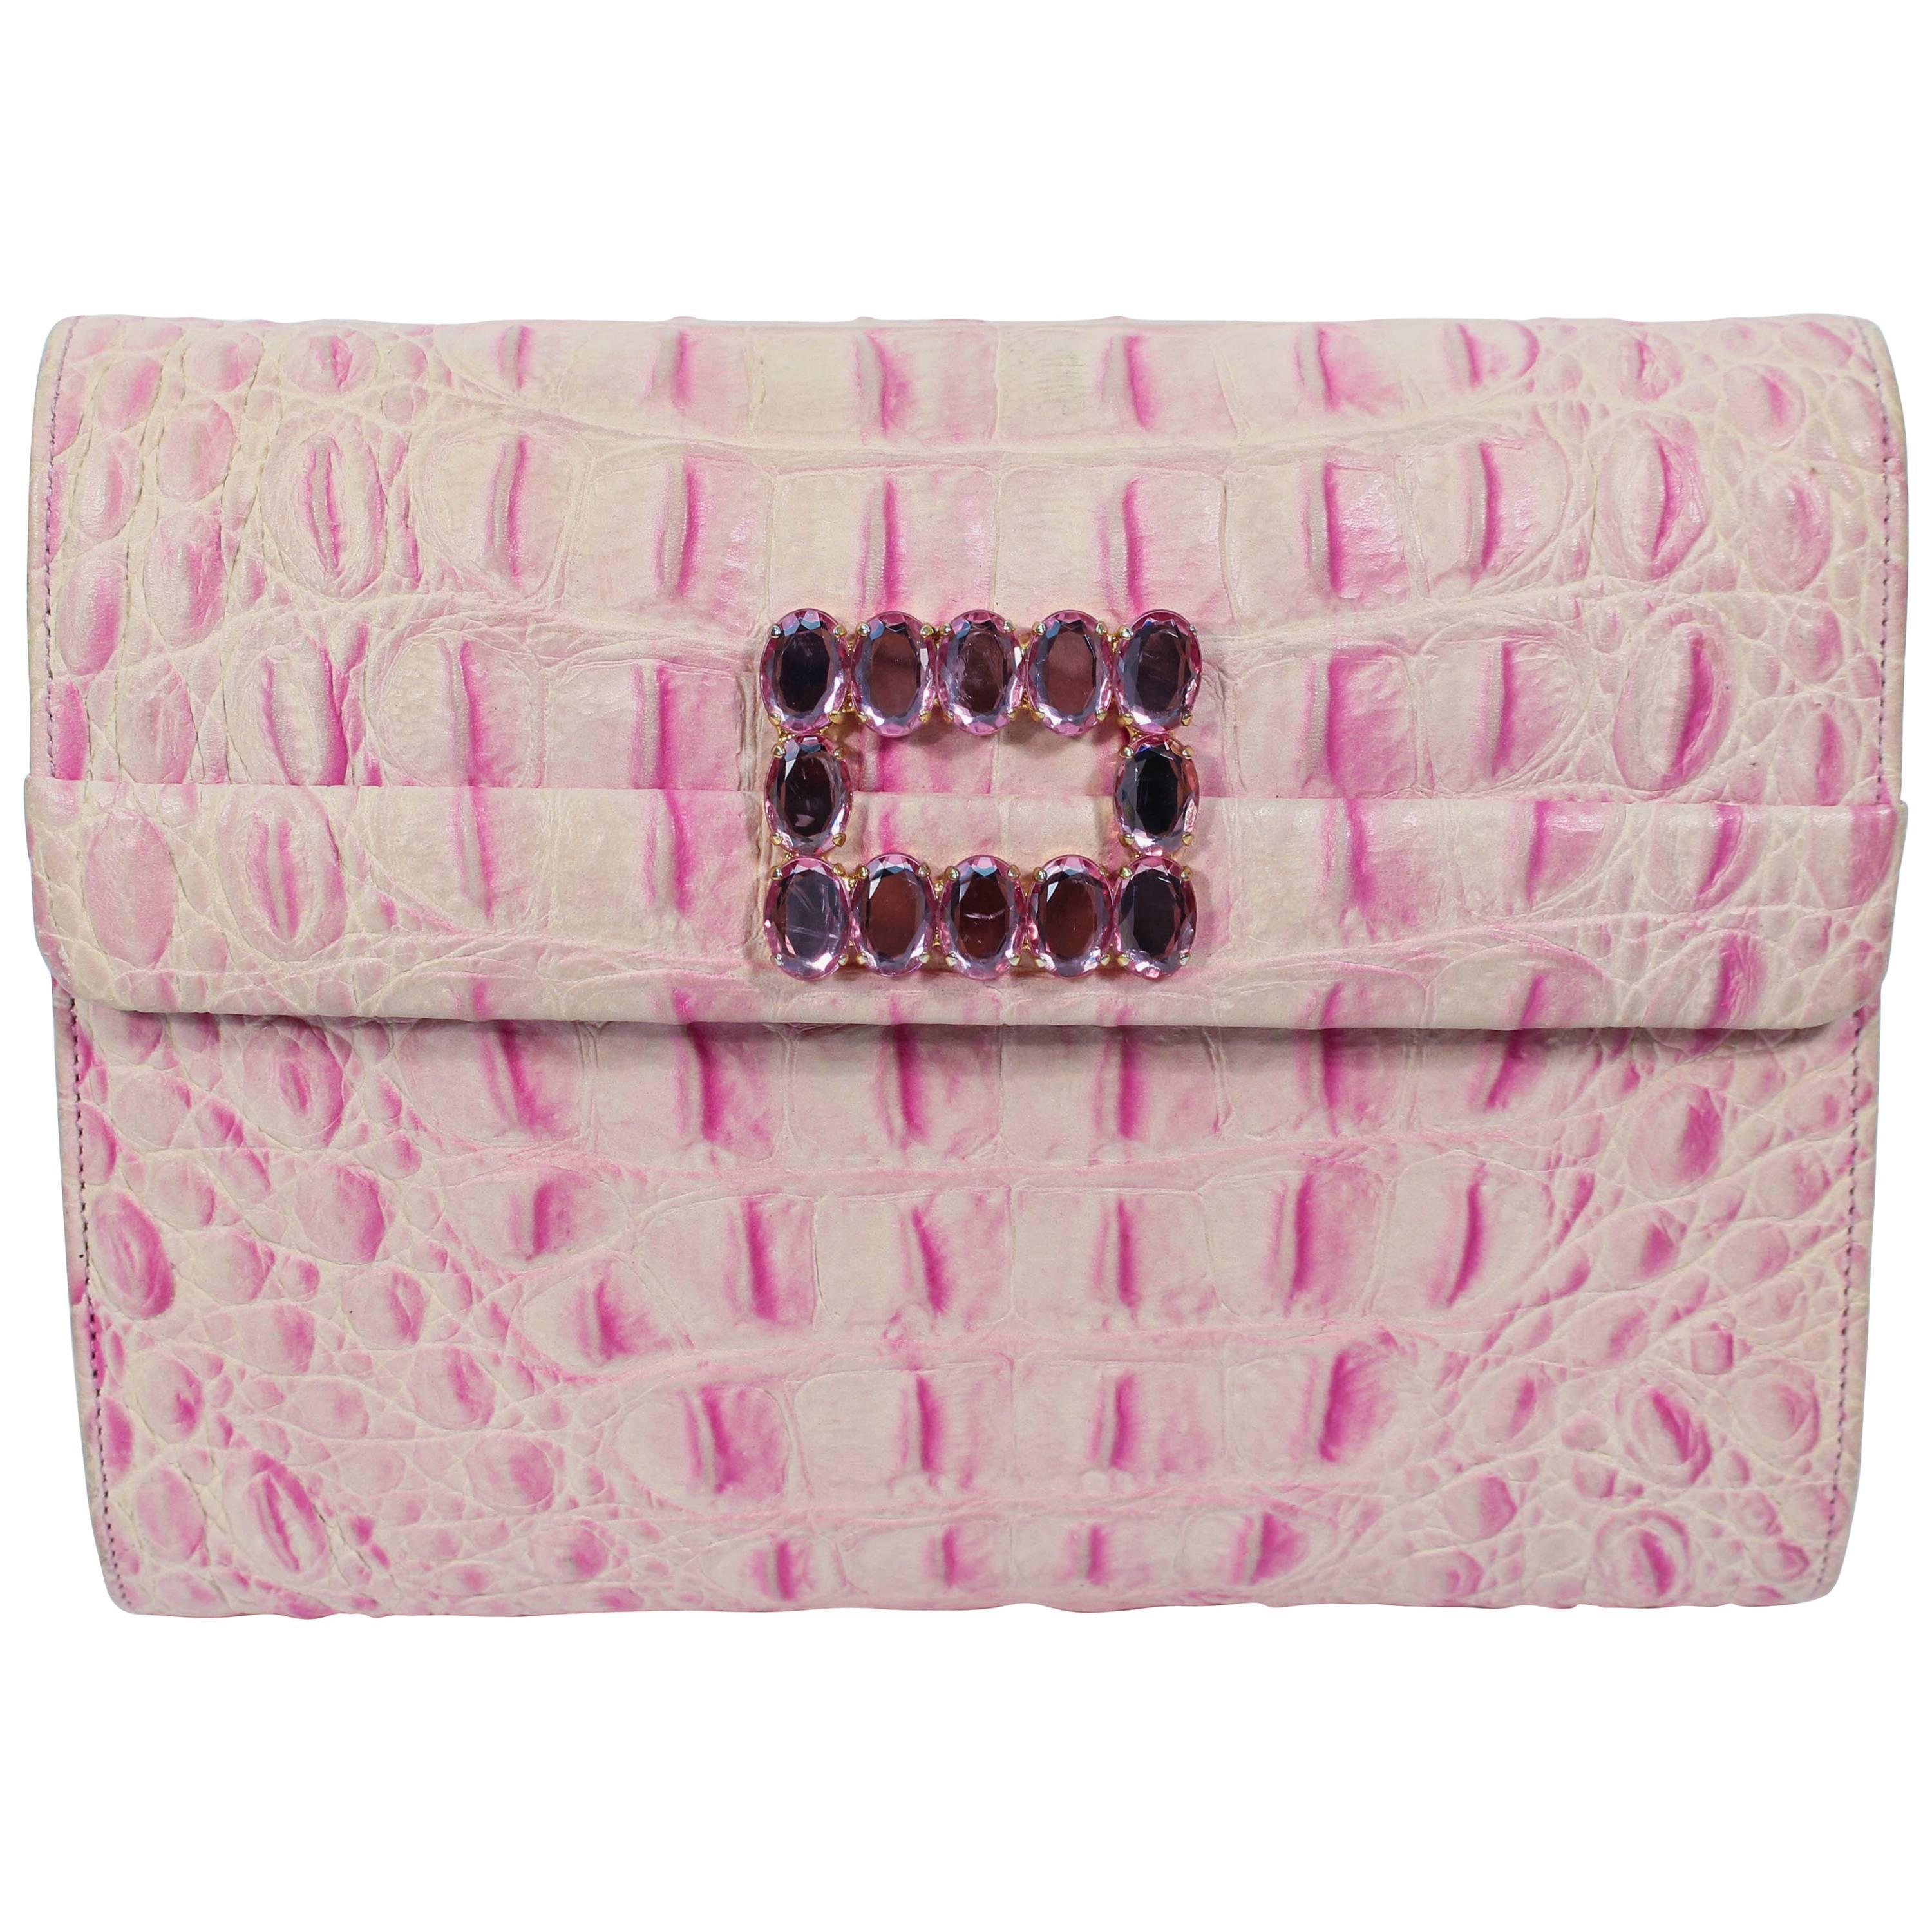 ANDREA PFISTER Pink & White Faux Crocodile Embossed Leather Clutch w/ Rhinestone